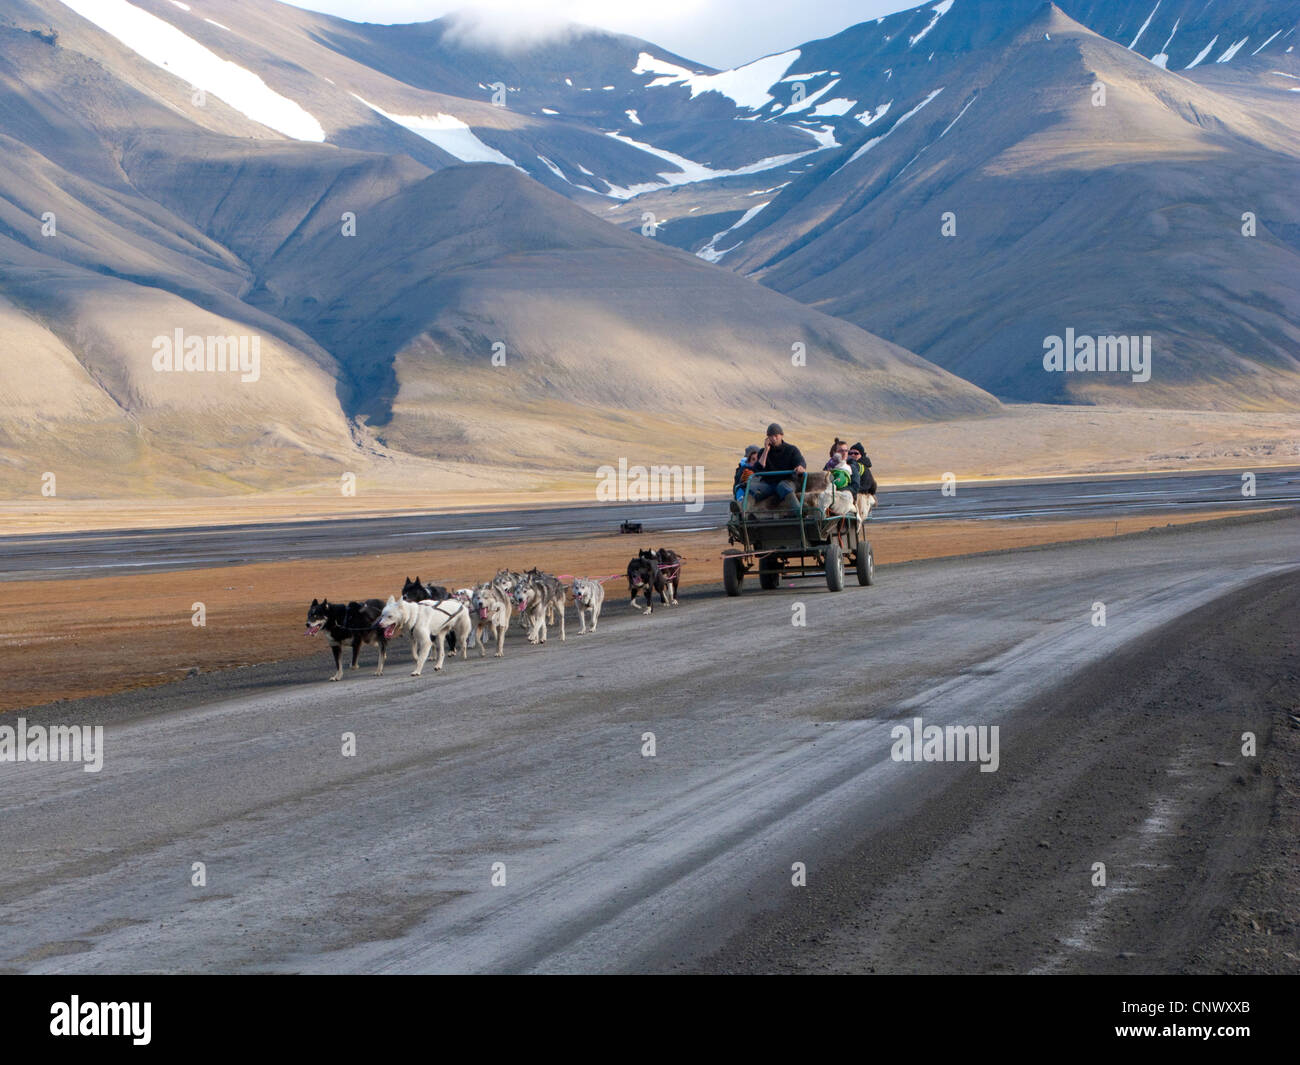 team of dogs pulling a wagon with tourists on a lonely road, Norway, Svalbard, Longyearbyen Stock Photo